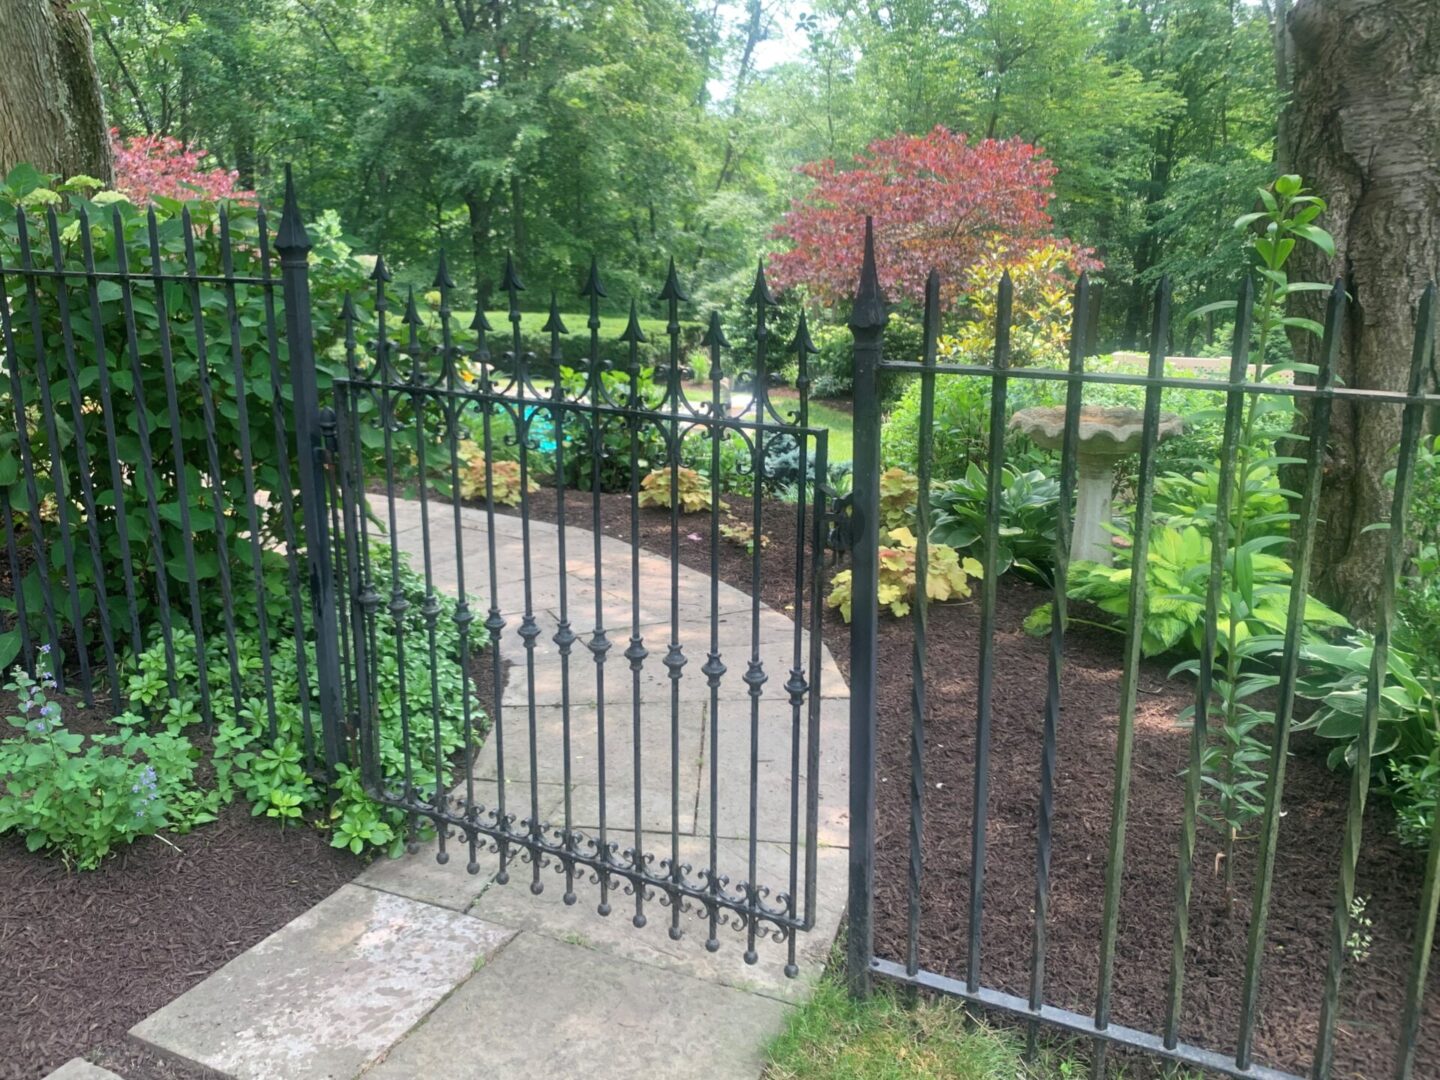 Gate and Railing, Garden with Colorful Plants and Trees